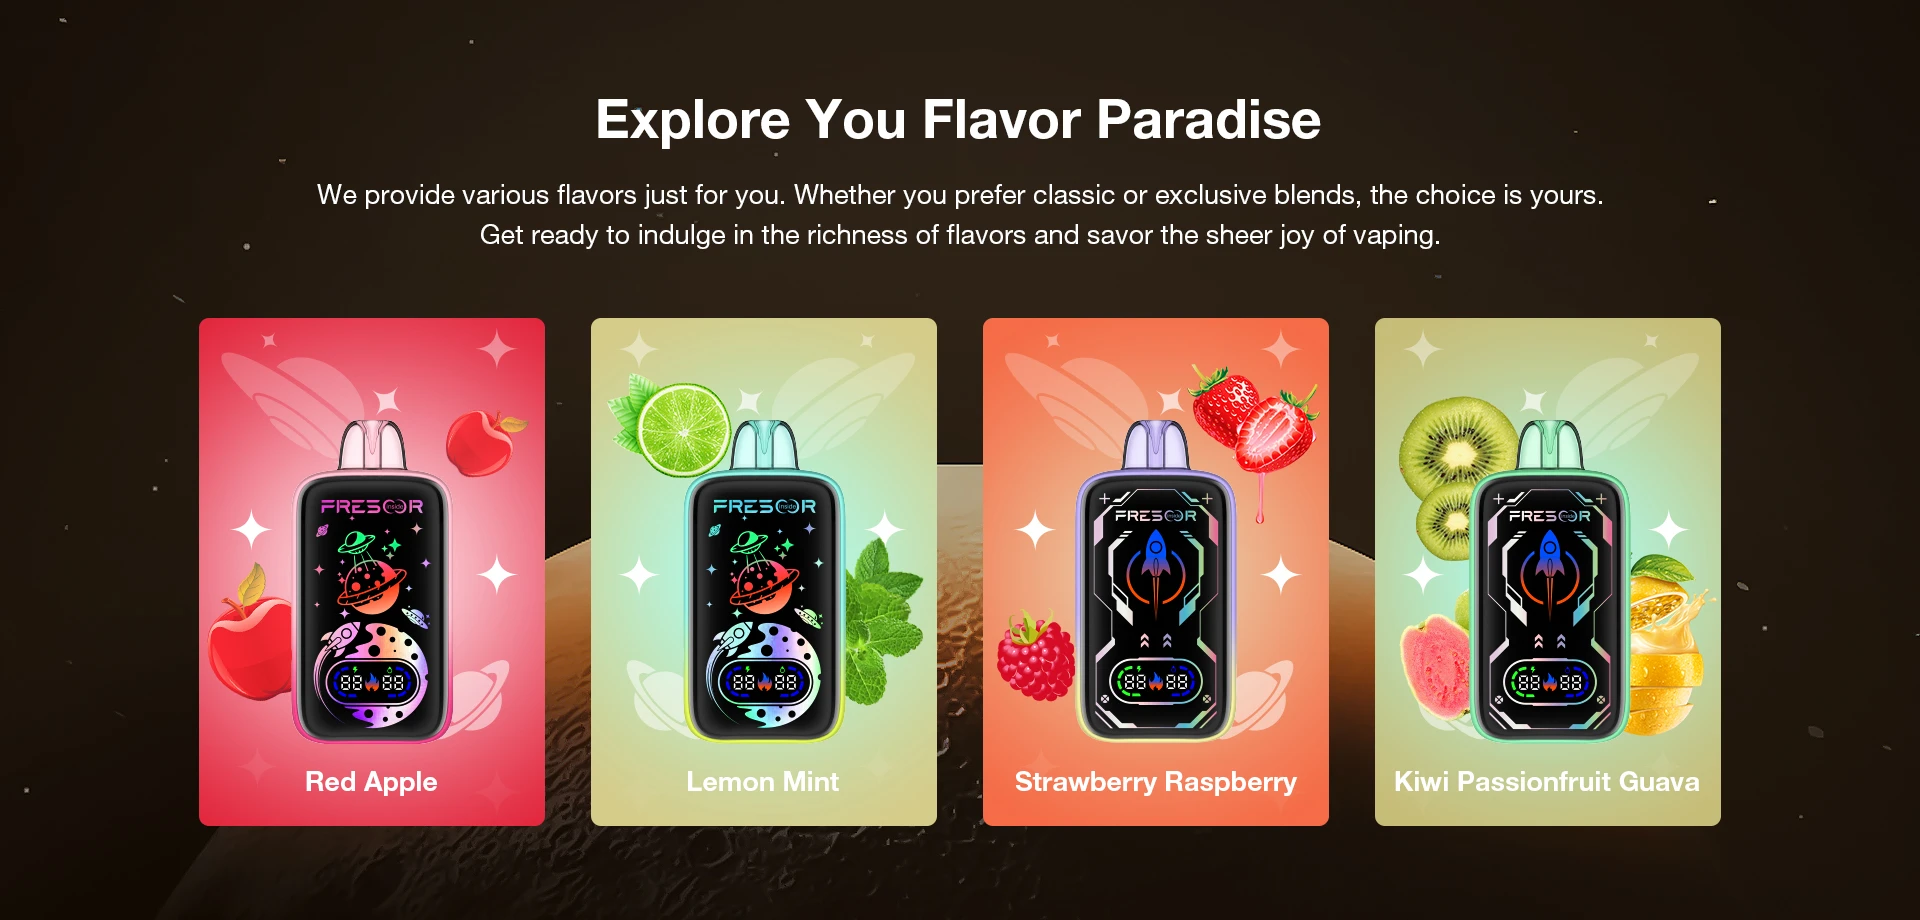 Explore You Flavor Paradise  We provide various flavors just for you. Whether you prefer classic or exclusive blends, the choice is yours. Get ready to indulge in the richness of flavors and savor the sheer joy of vaping. Red Apple Lemon Mint Strawberry Raspberry Kiwi Passionfruit Guava